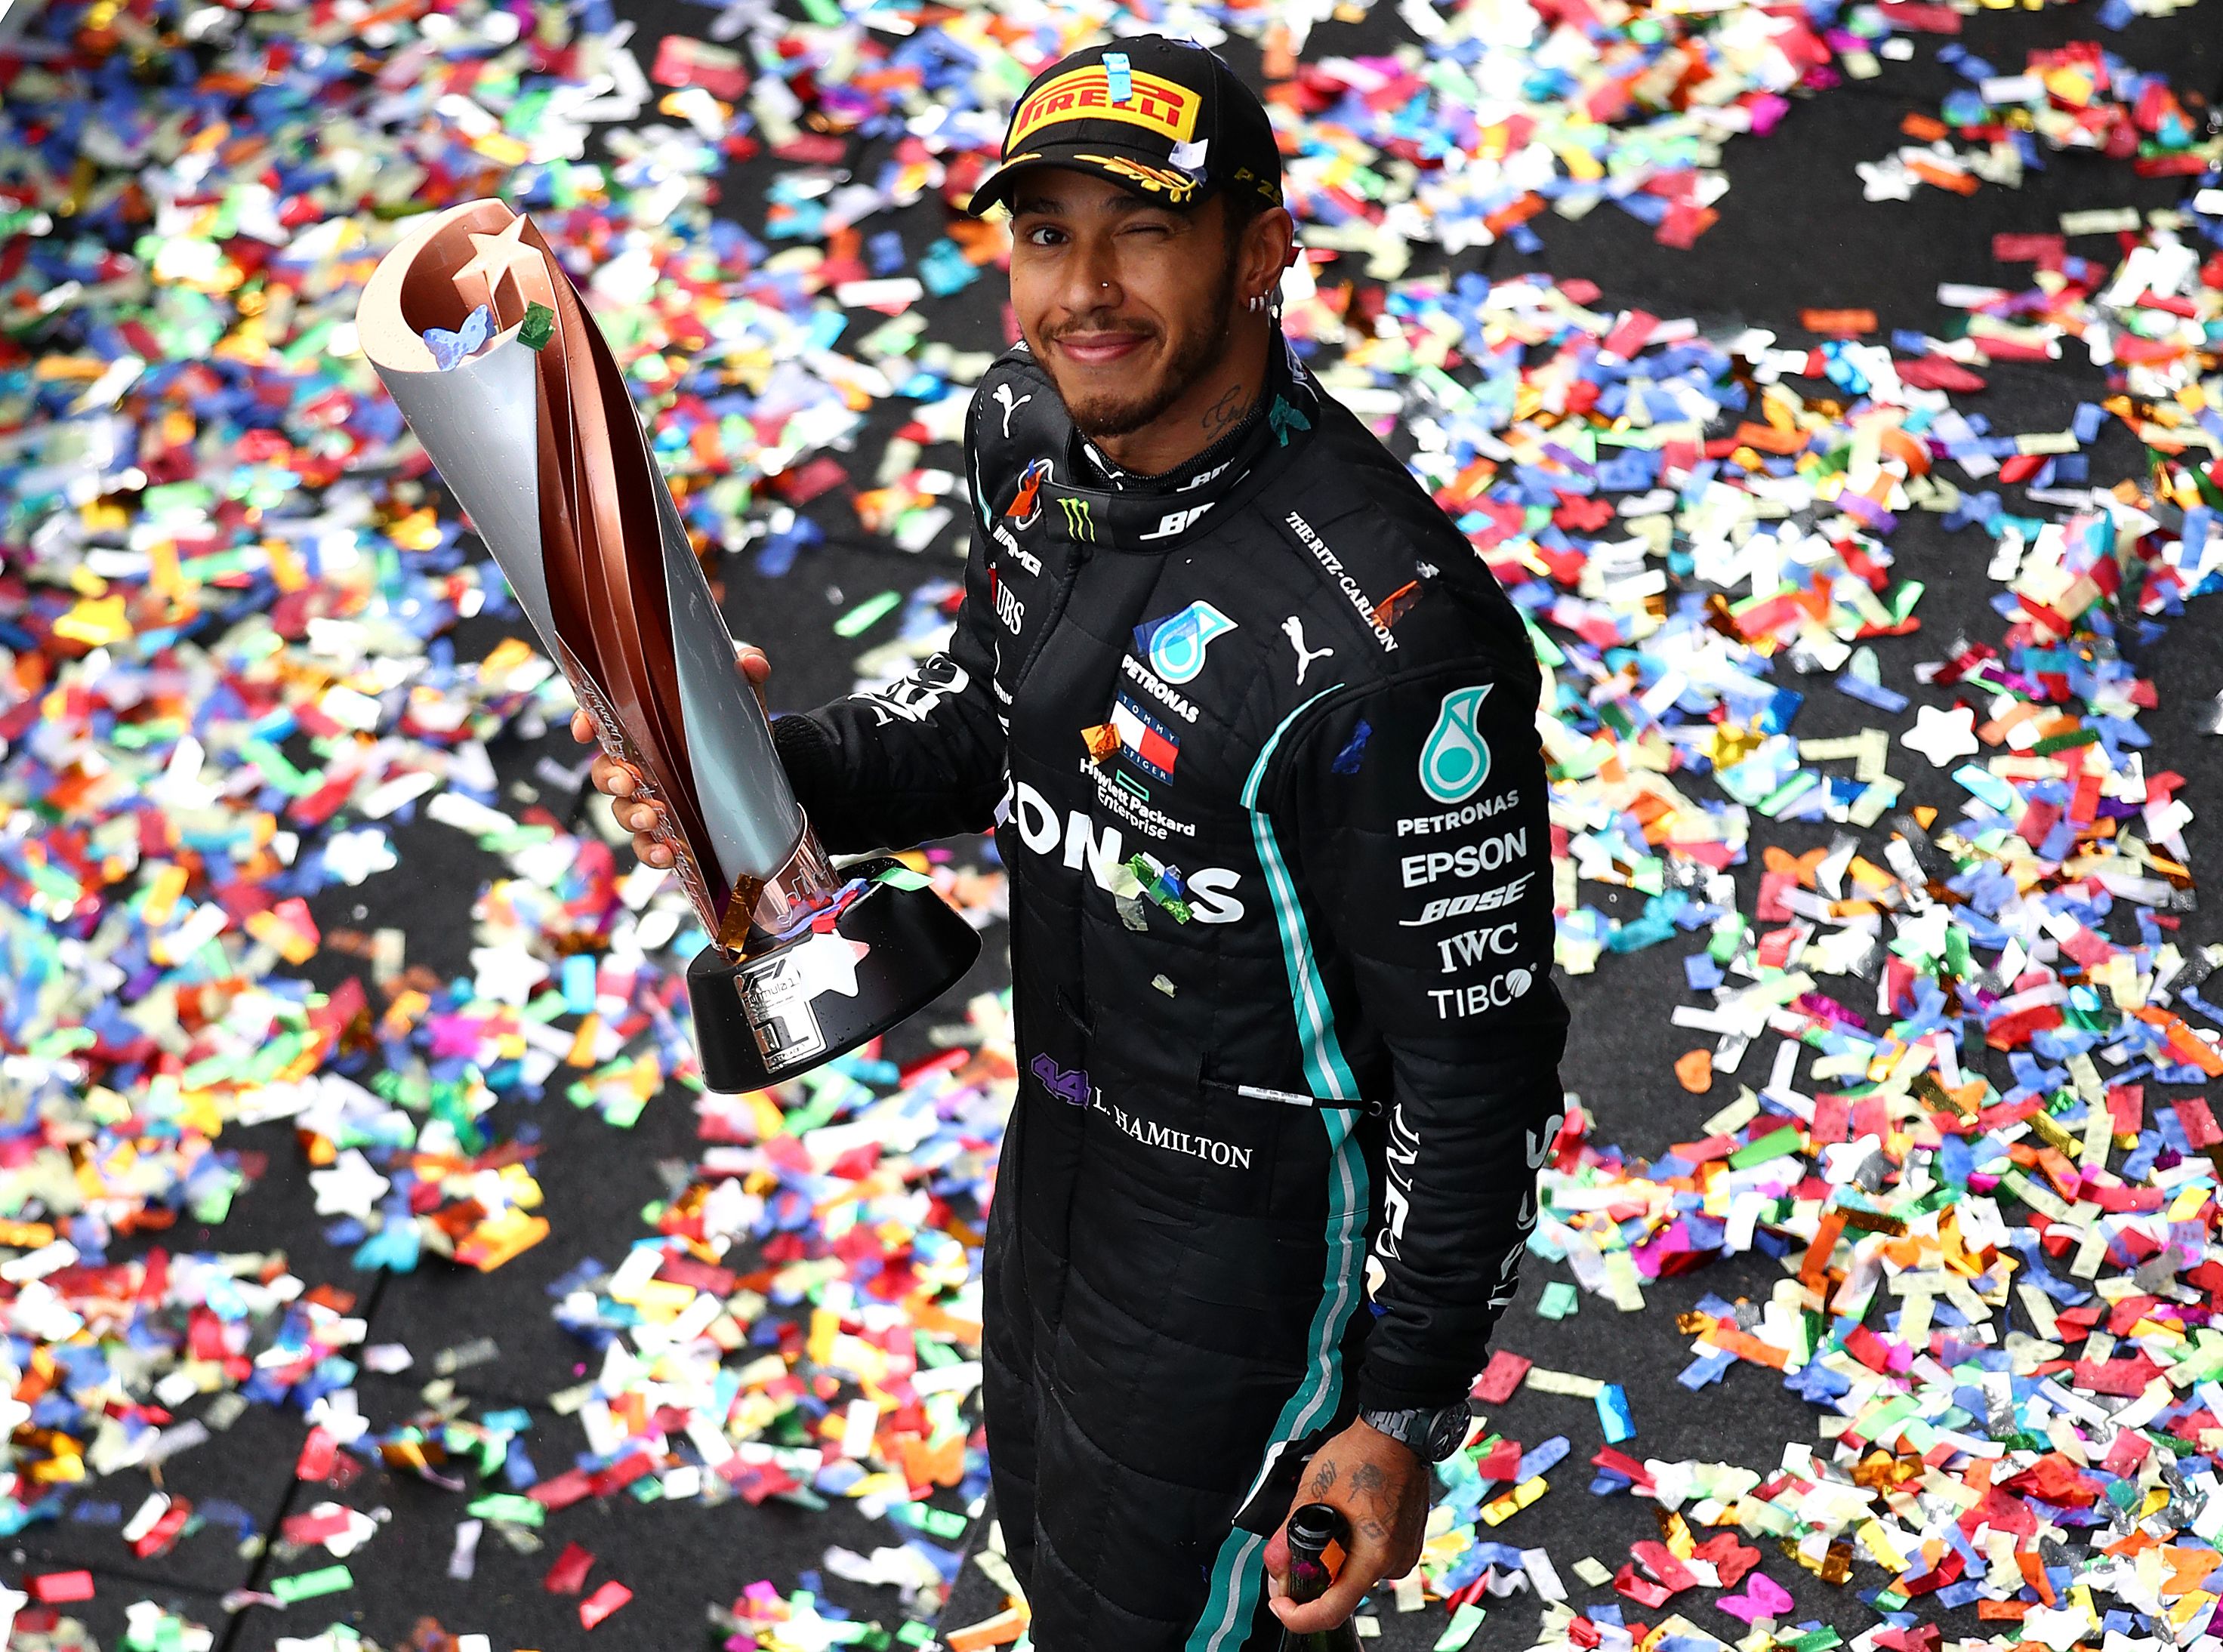 Lewis Hamilton after winning the 2020 F1 world title